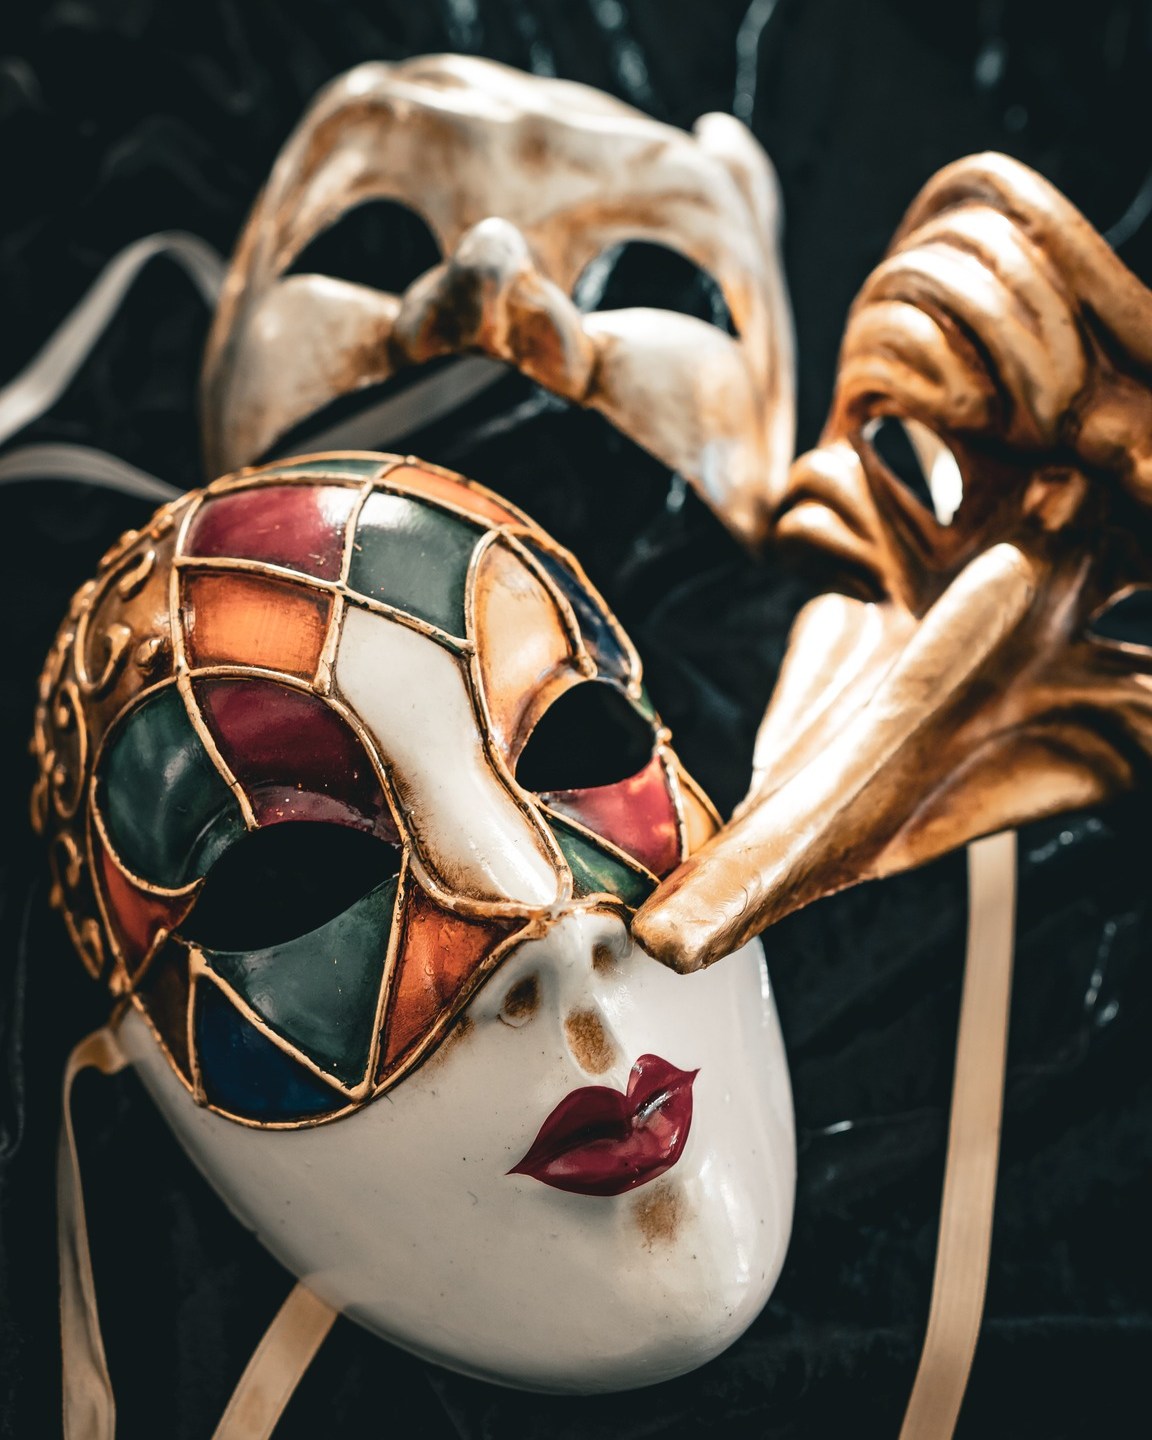 Masquerade Ball: The Story Behind the Mask